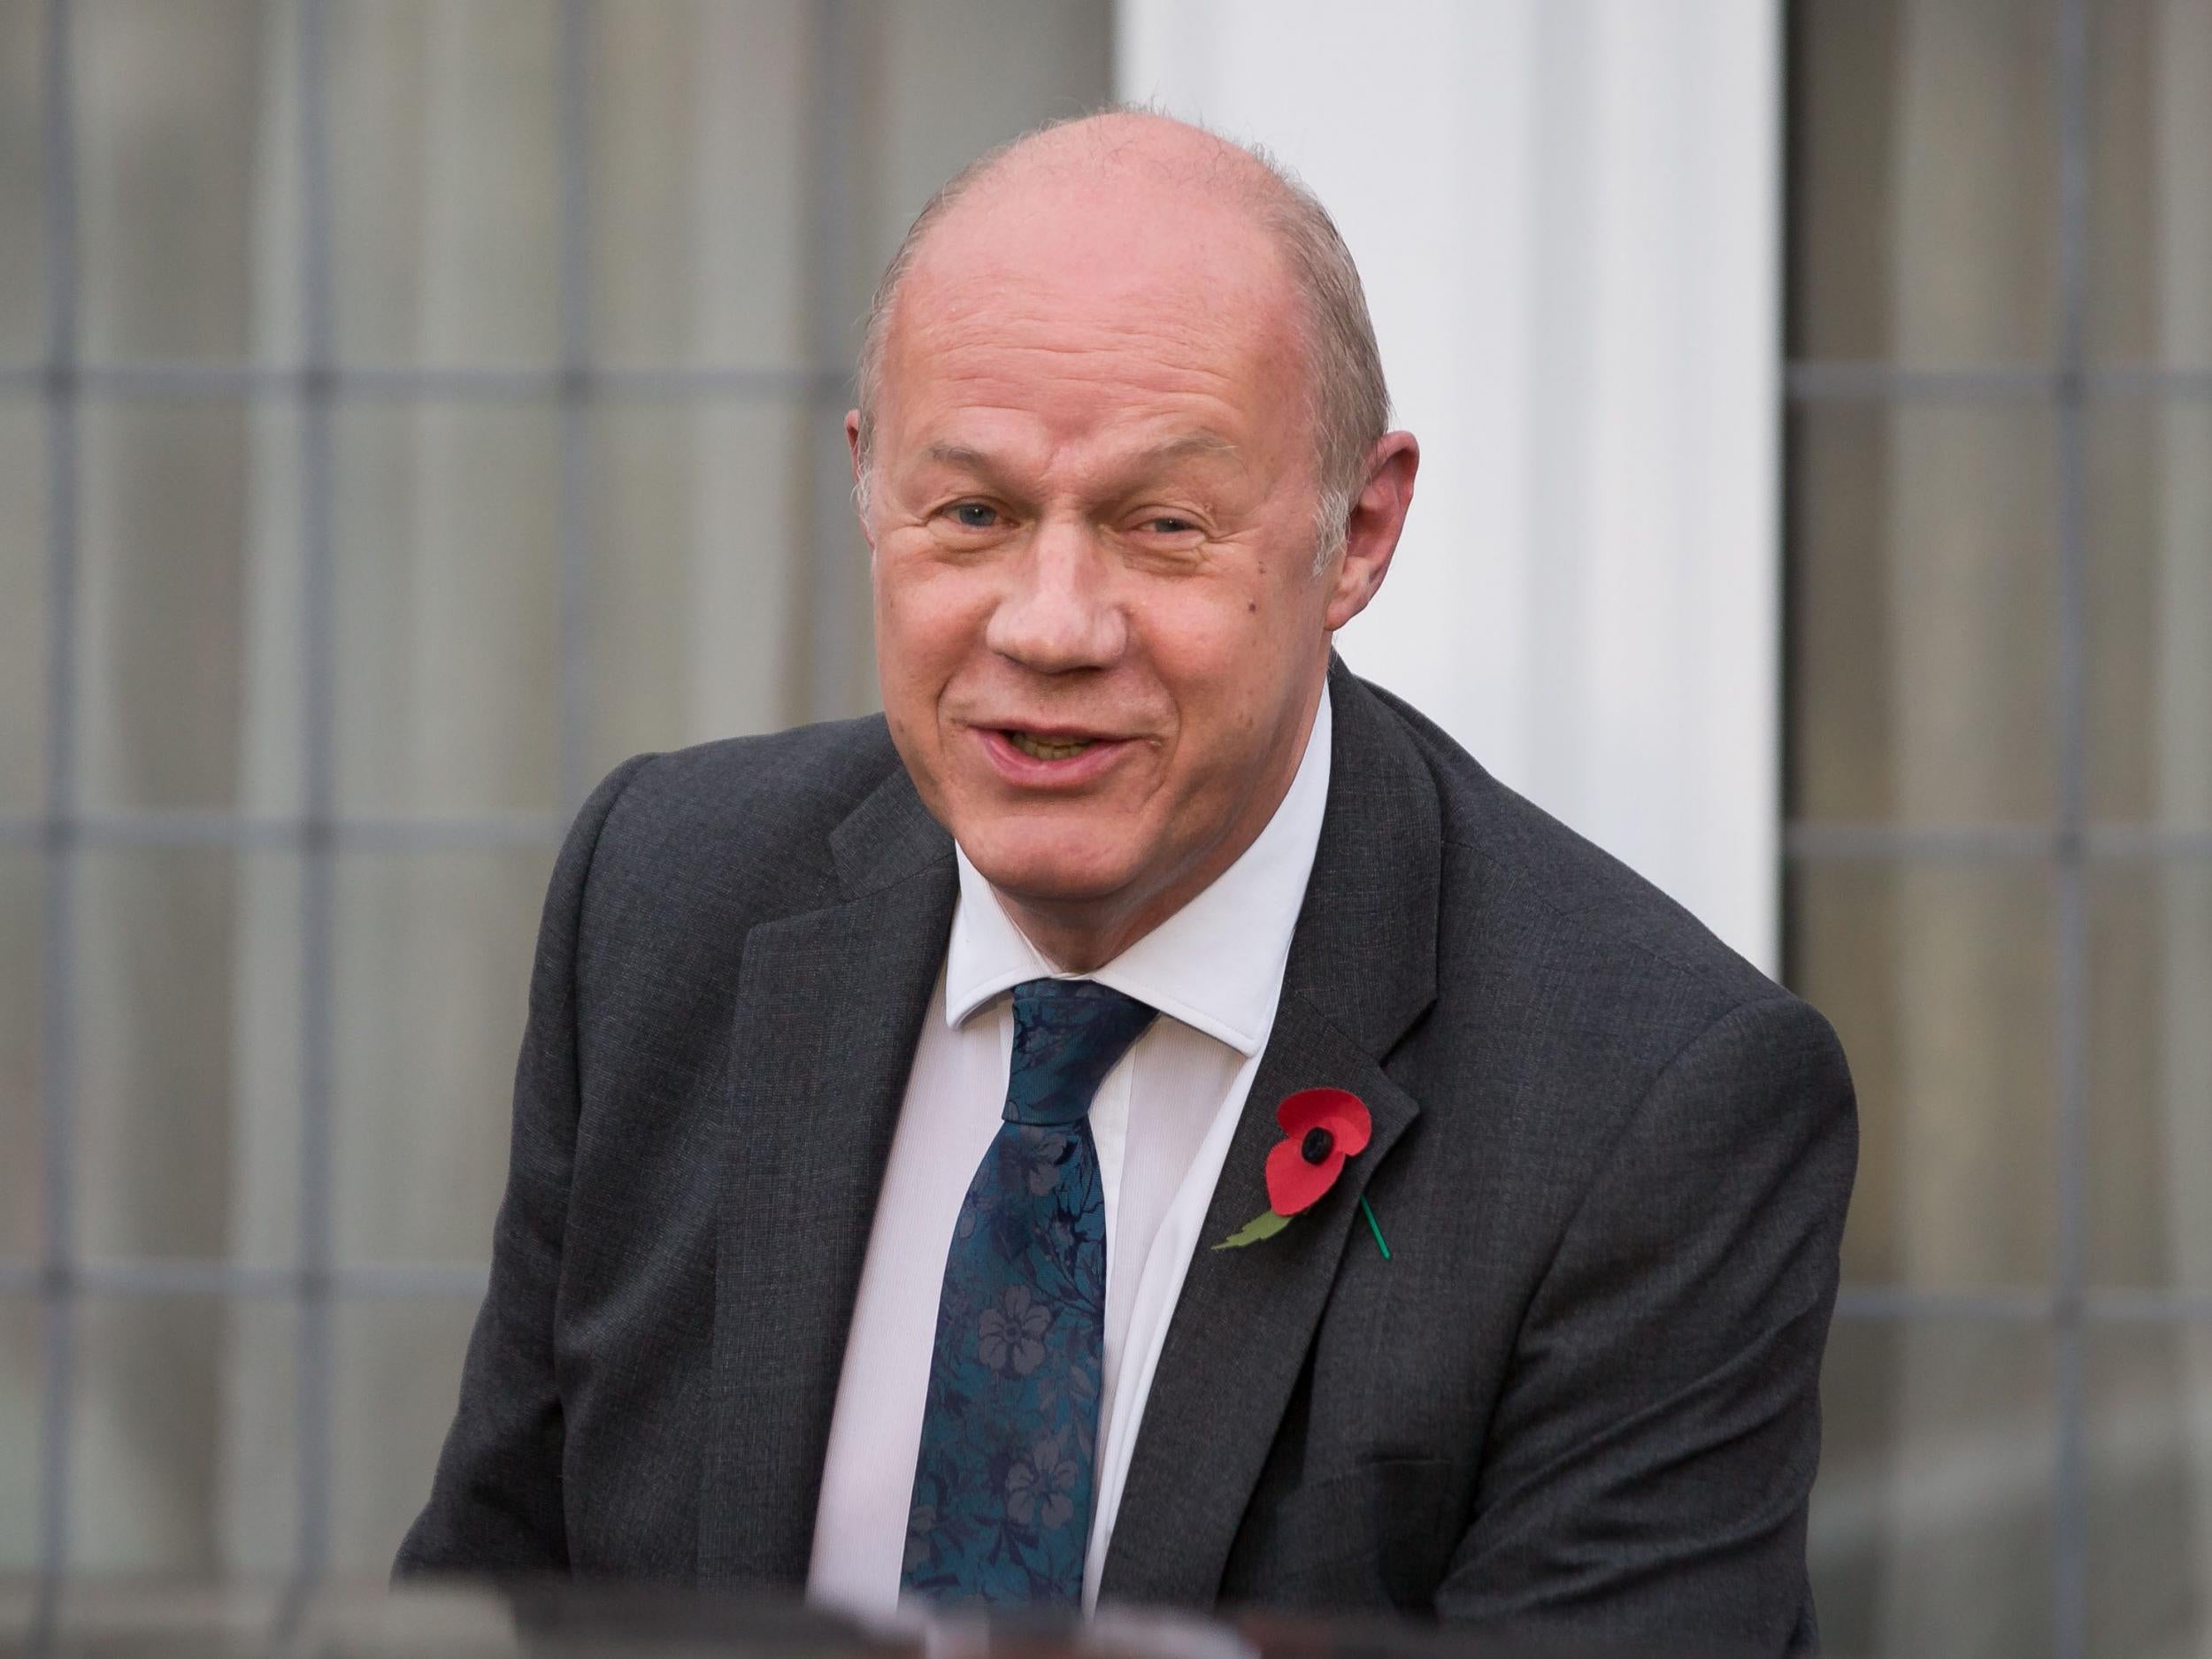 First Secretary of State Damian Green will step in for the Prime Minister at PMQs